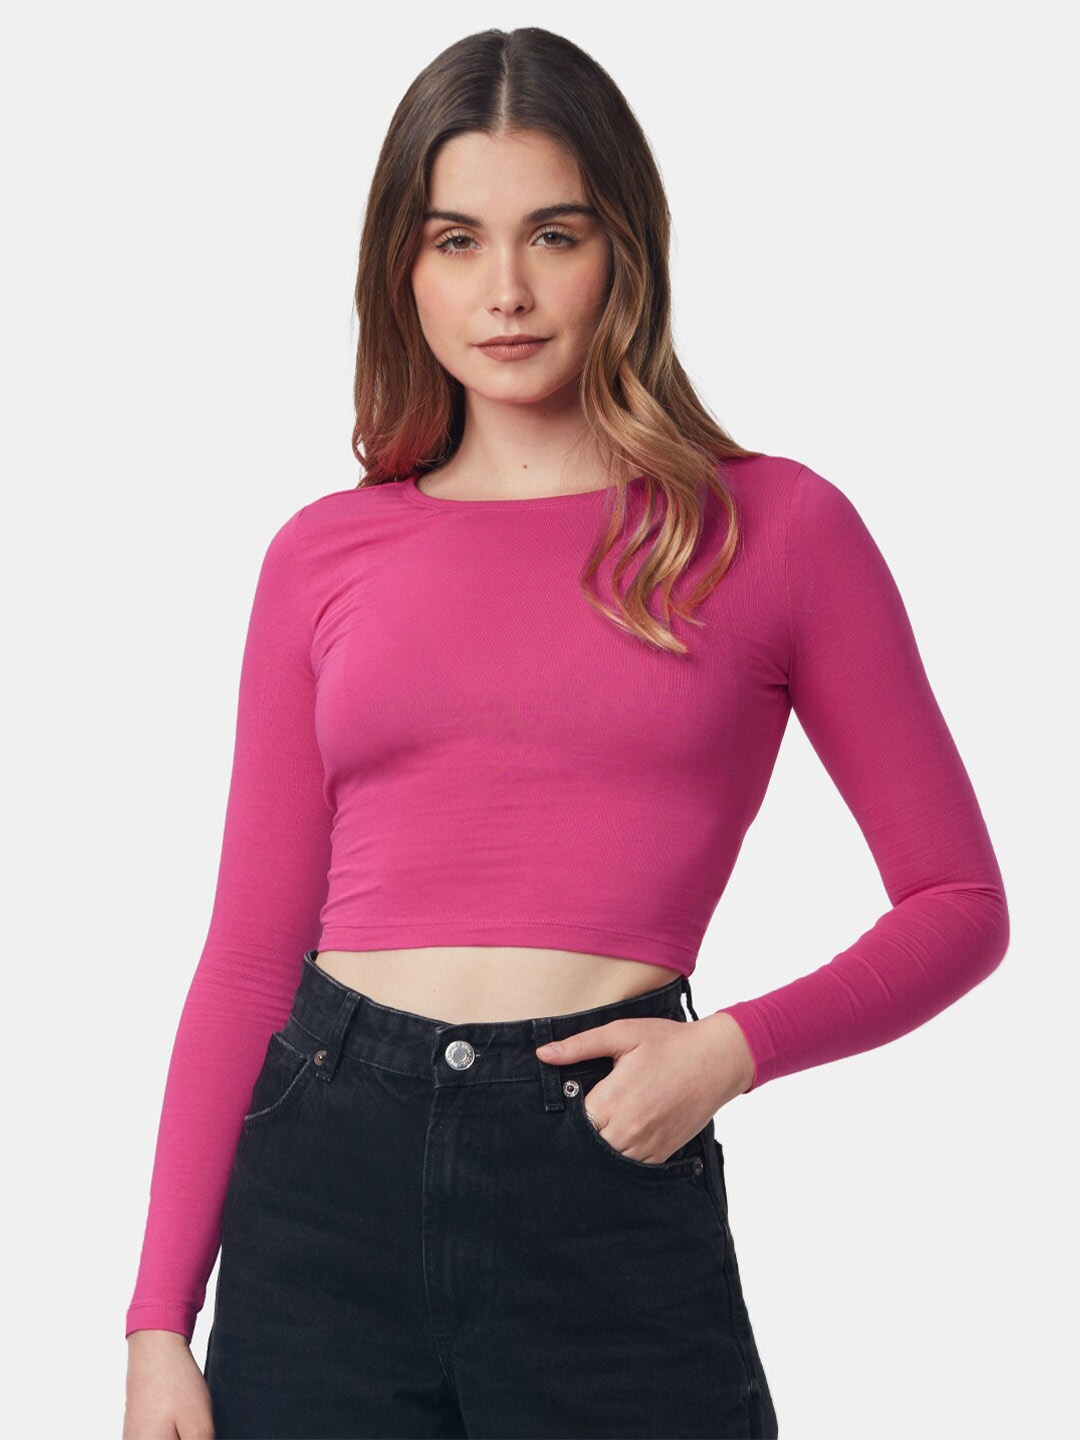 The Souled Store Women Crop Top Price in India